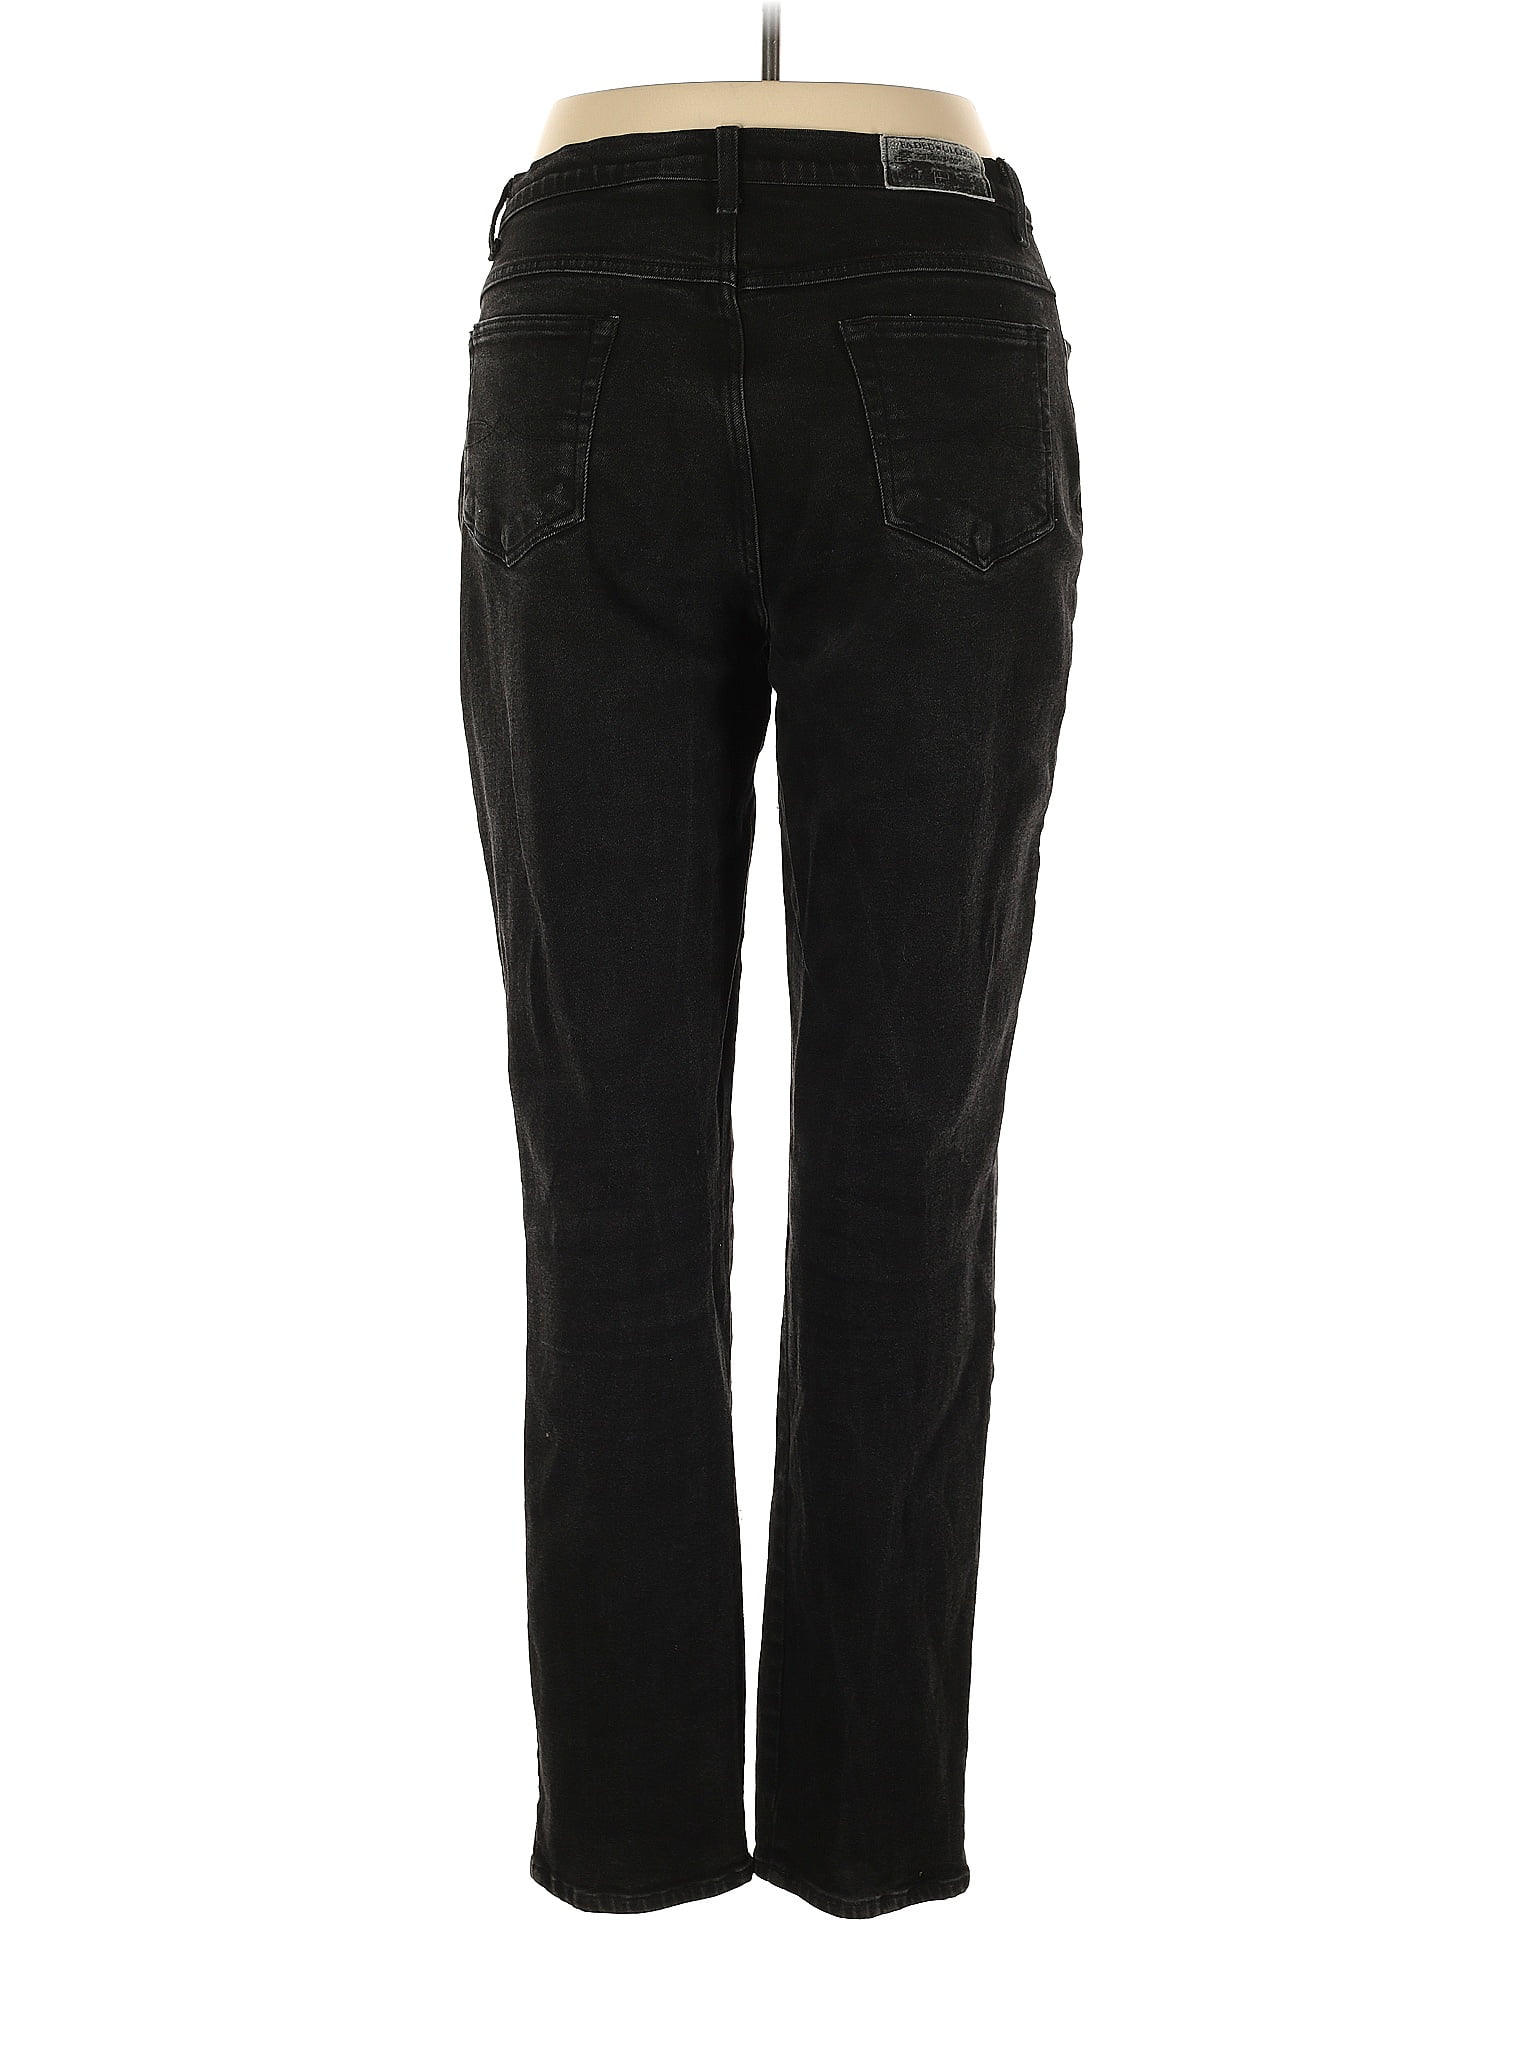 Faded Glory Solid Black Jeans Size 18 (Plus) - 52% off